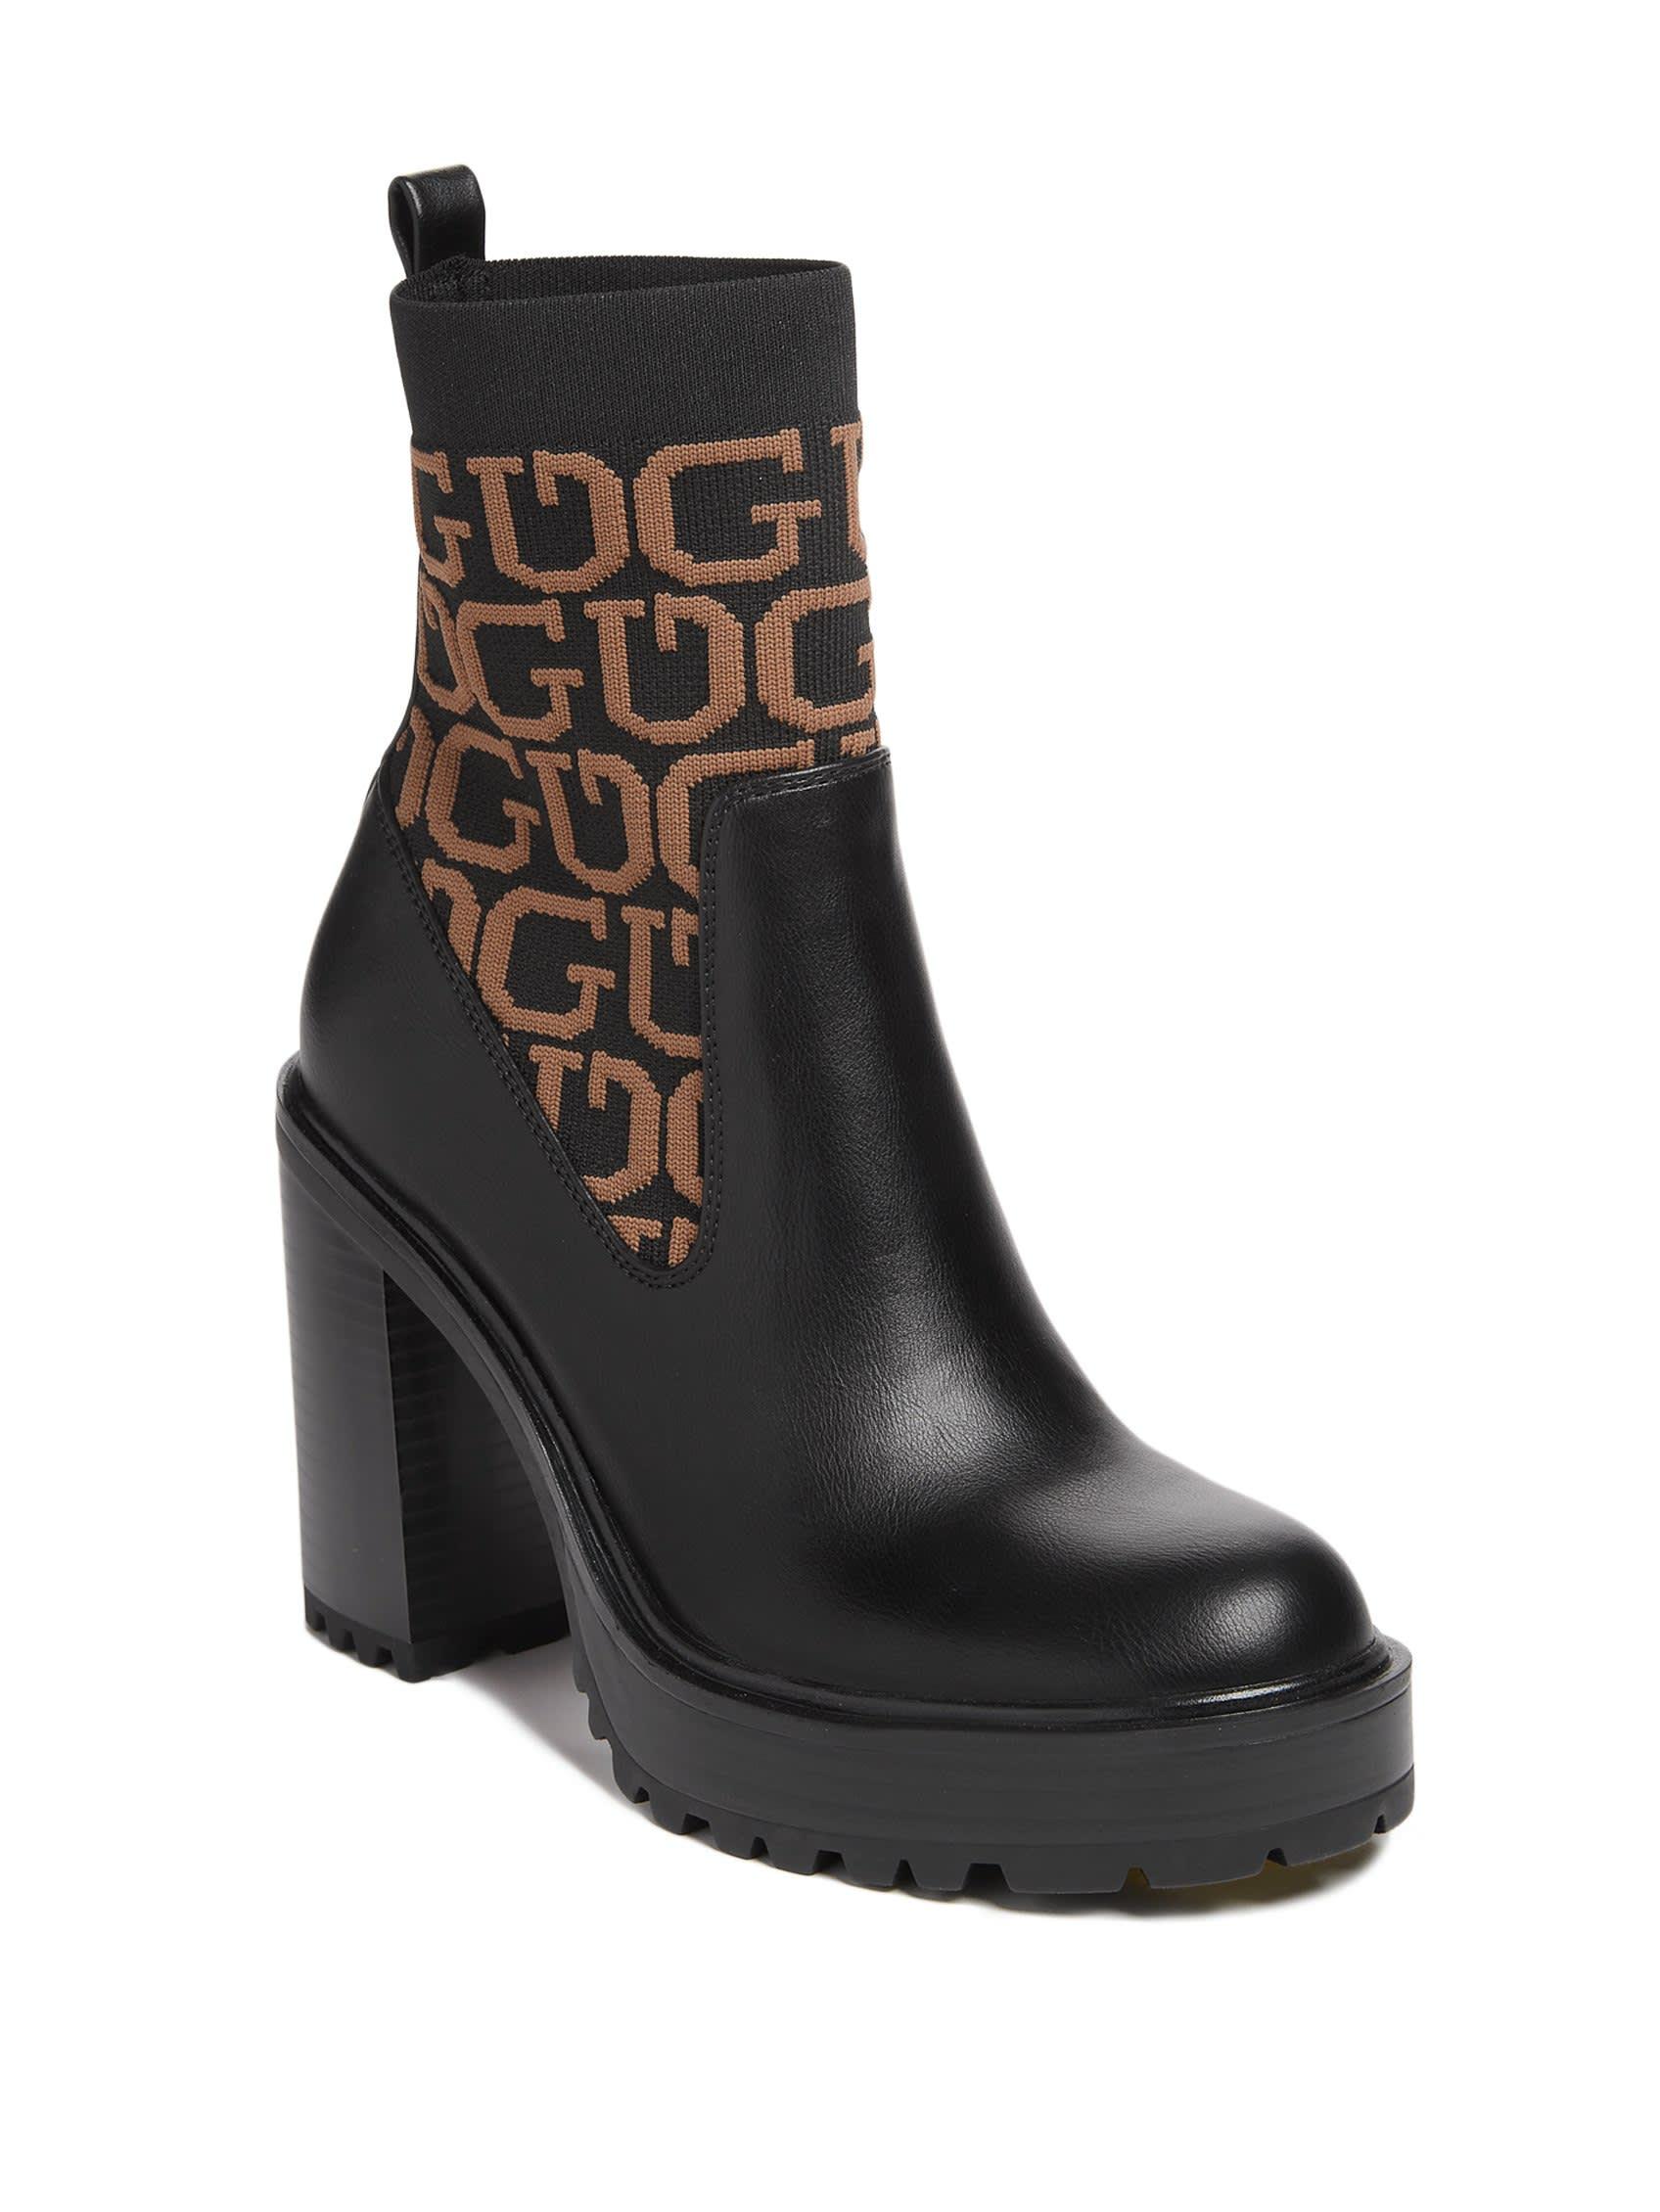 Guess Factory Heeled Logo Boots | Lyst